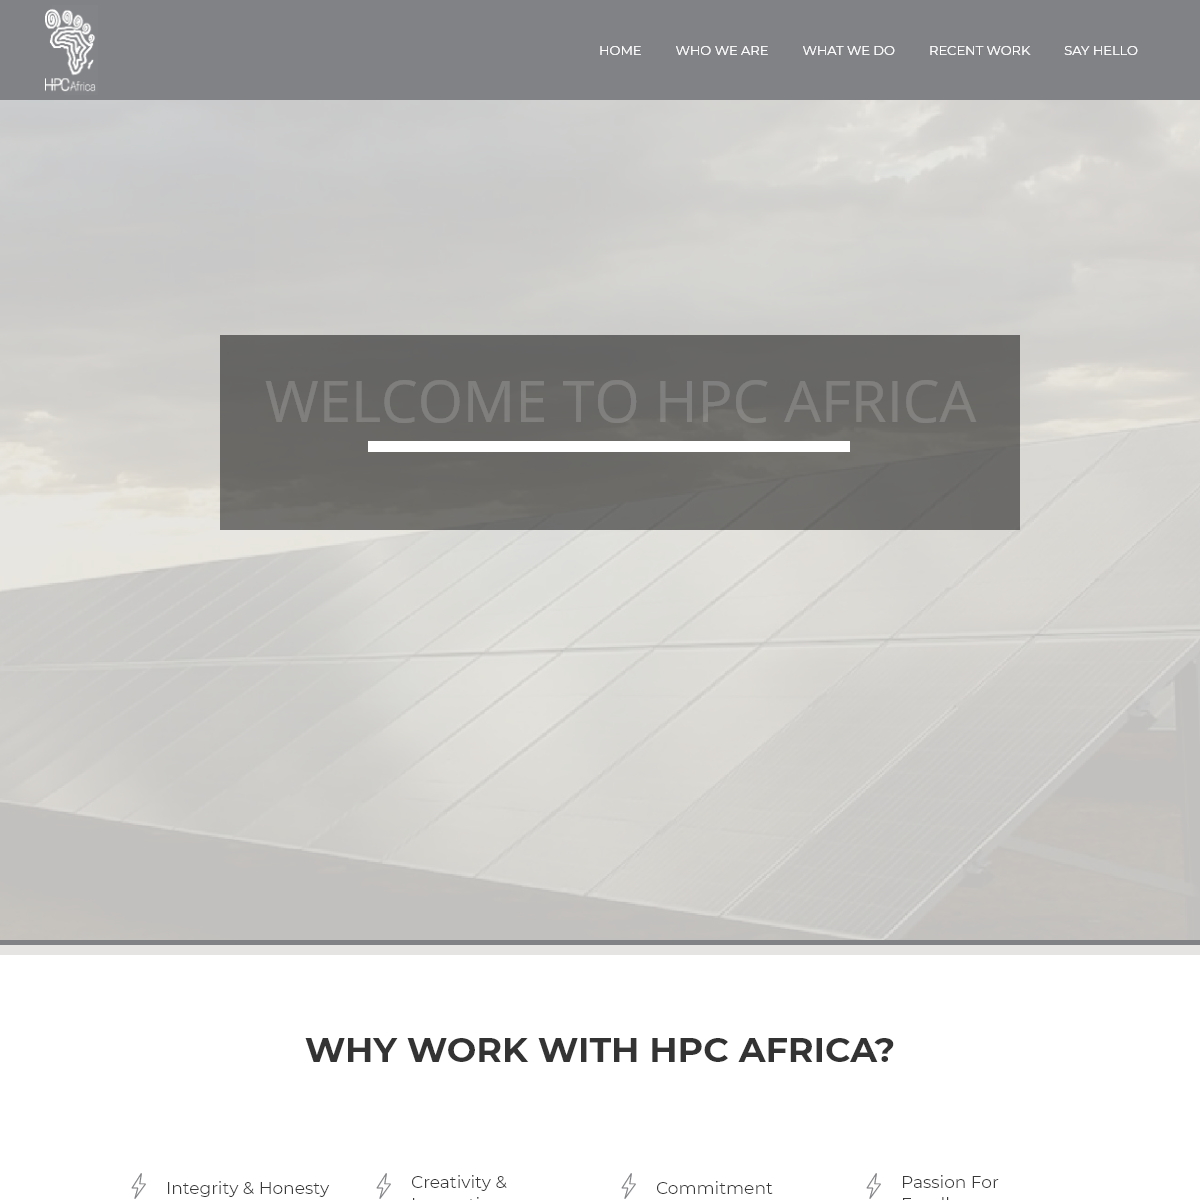 A complete backup of hpcafrica.com